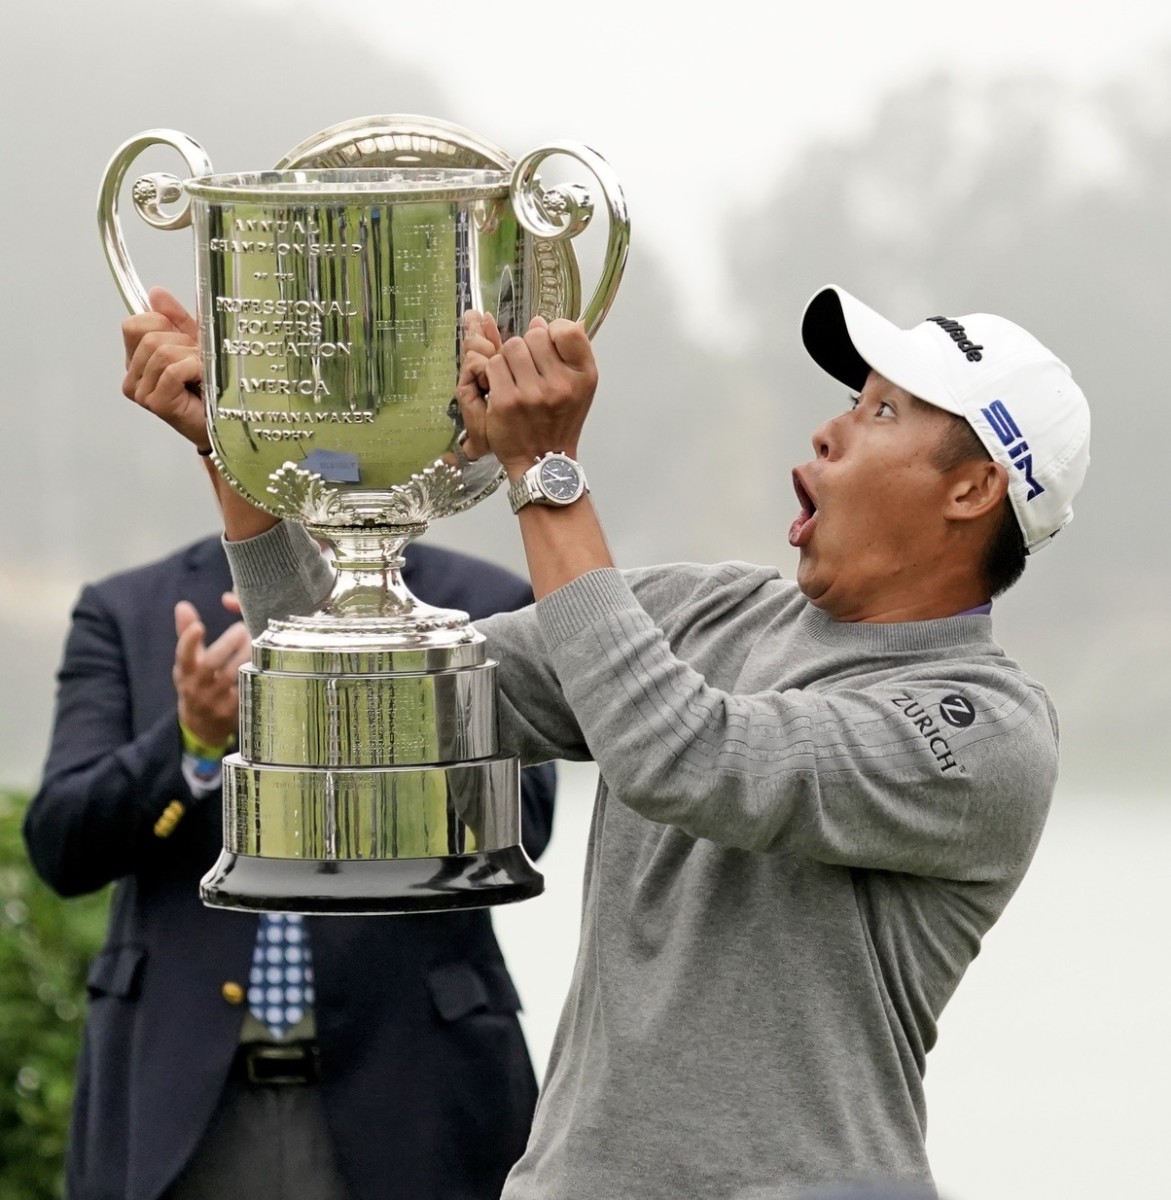 Collin Morikawa reacts with shock when the top of the Wanamaker Trophy falls off during his victory ceremony.